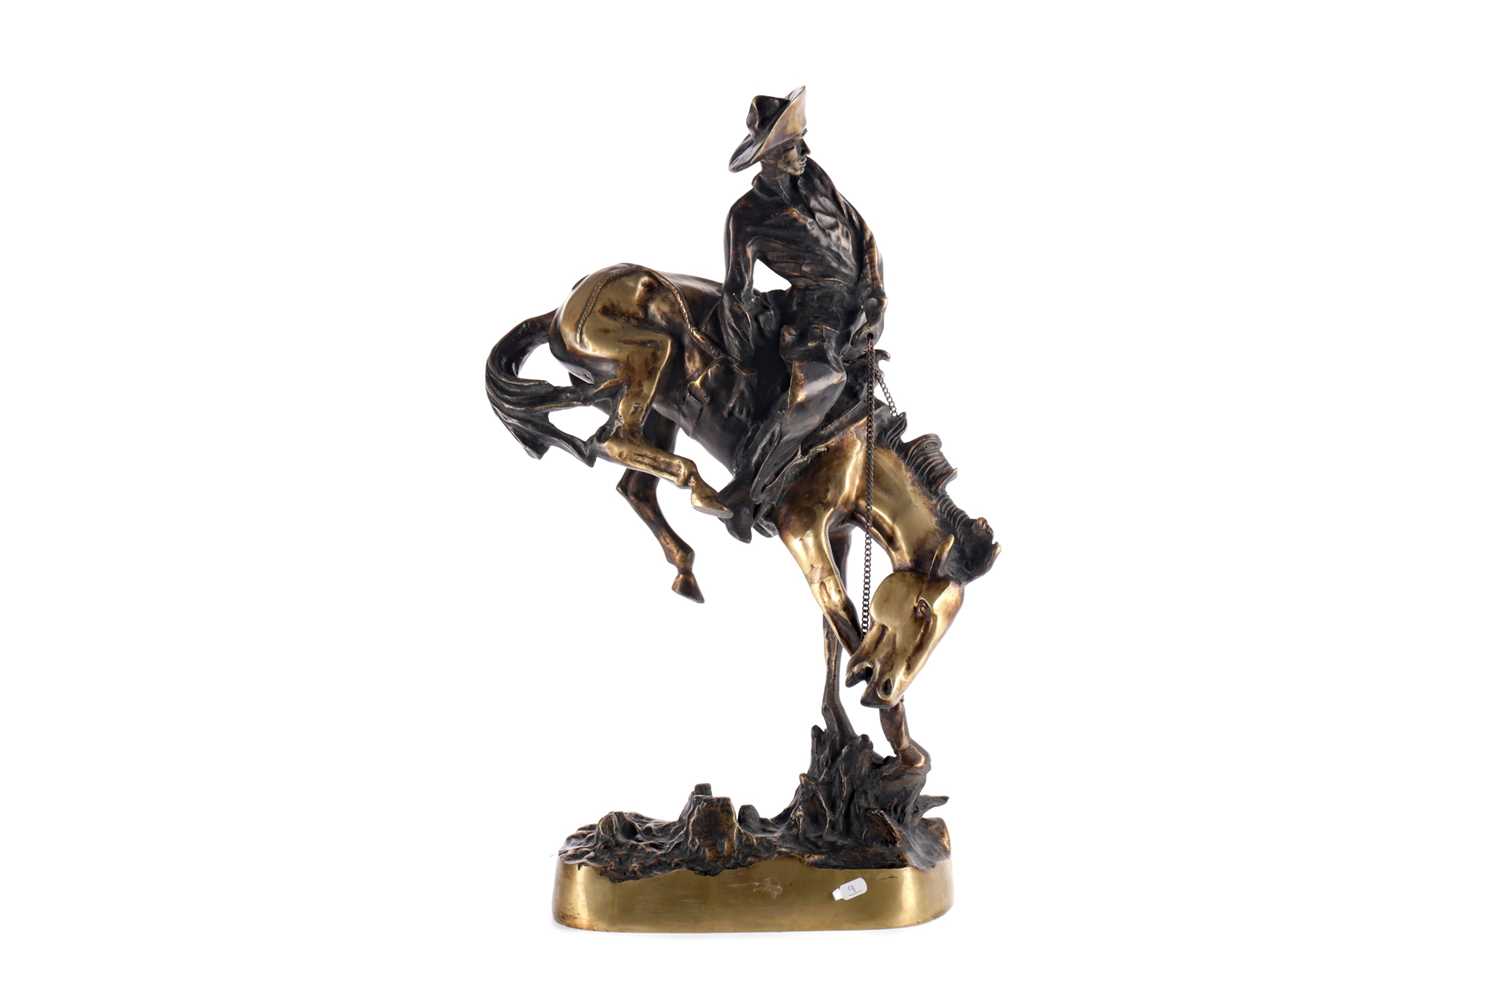 Lot 1684 - AFTER FREDERIC REMINGTON, BRONZE SCULPTURE OF 'BUCKING BRONCO'